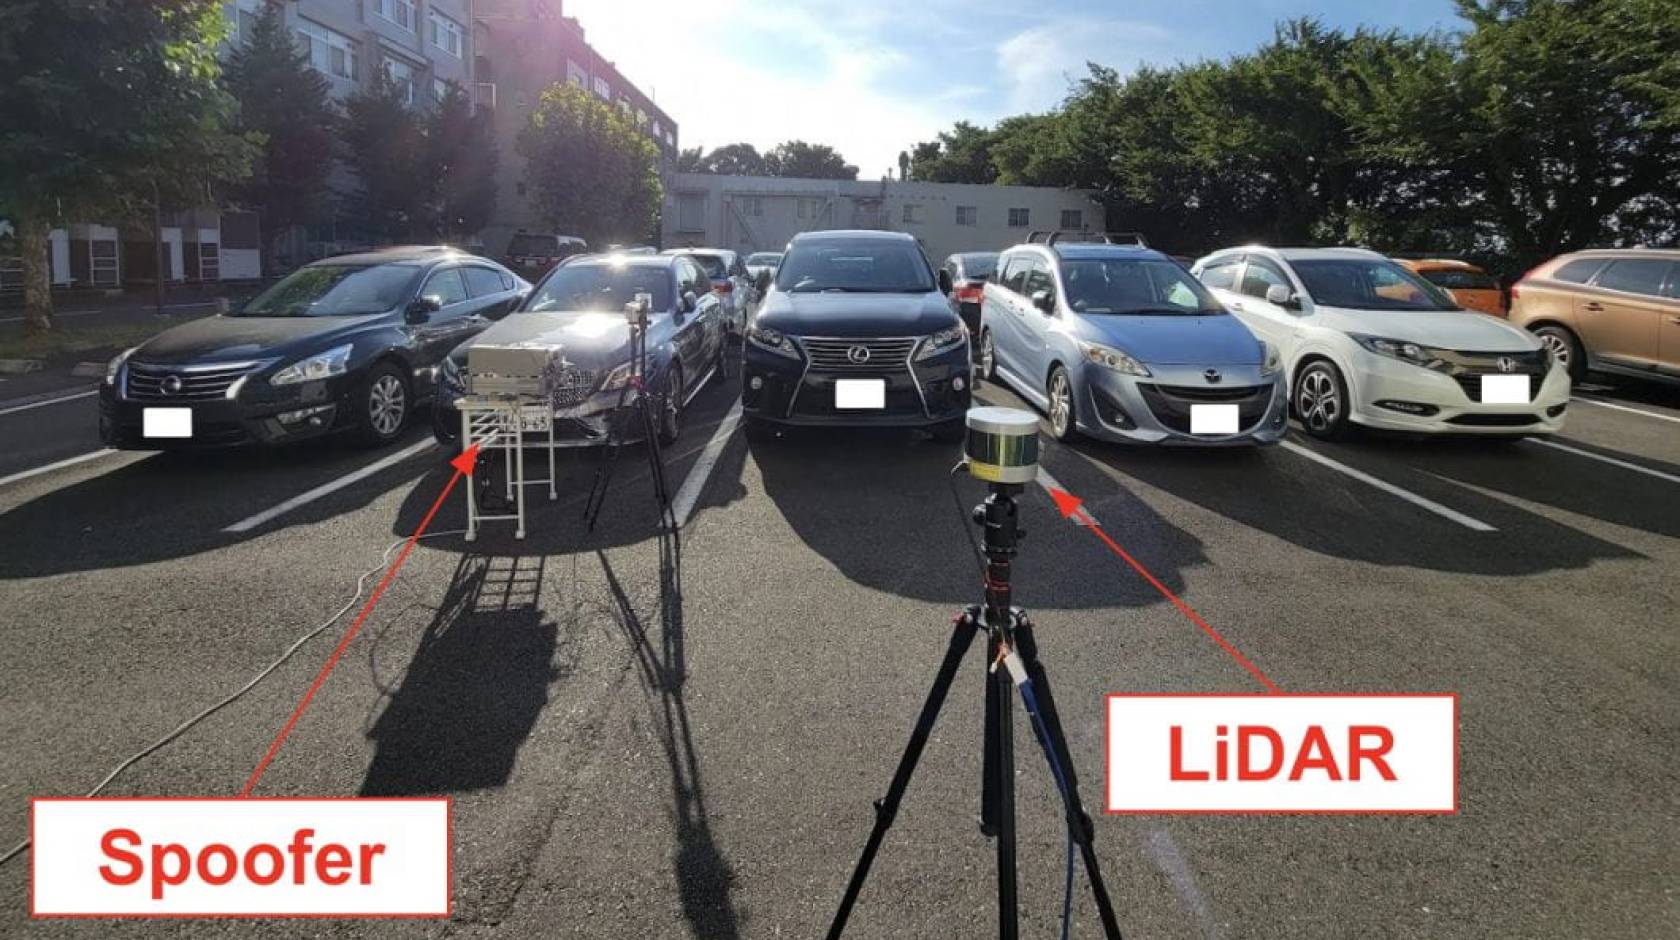 A row of parked cars with a LiDAR on a tripod and another object that looks like a grill, known as a spoofer, directly in front of a car